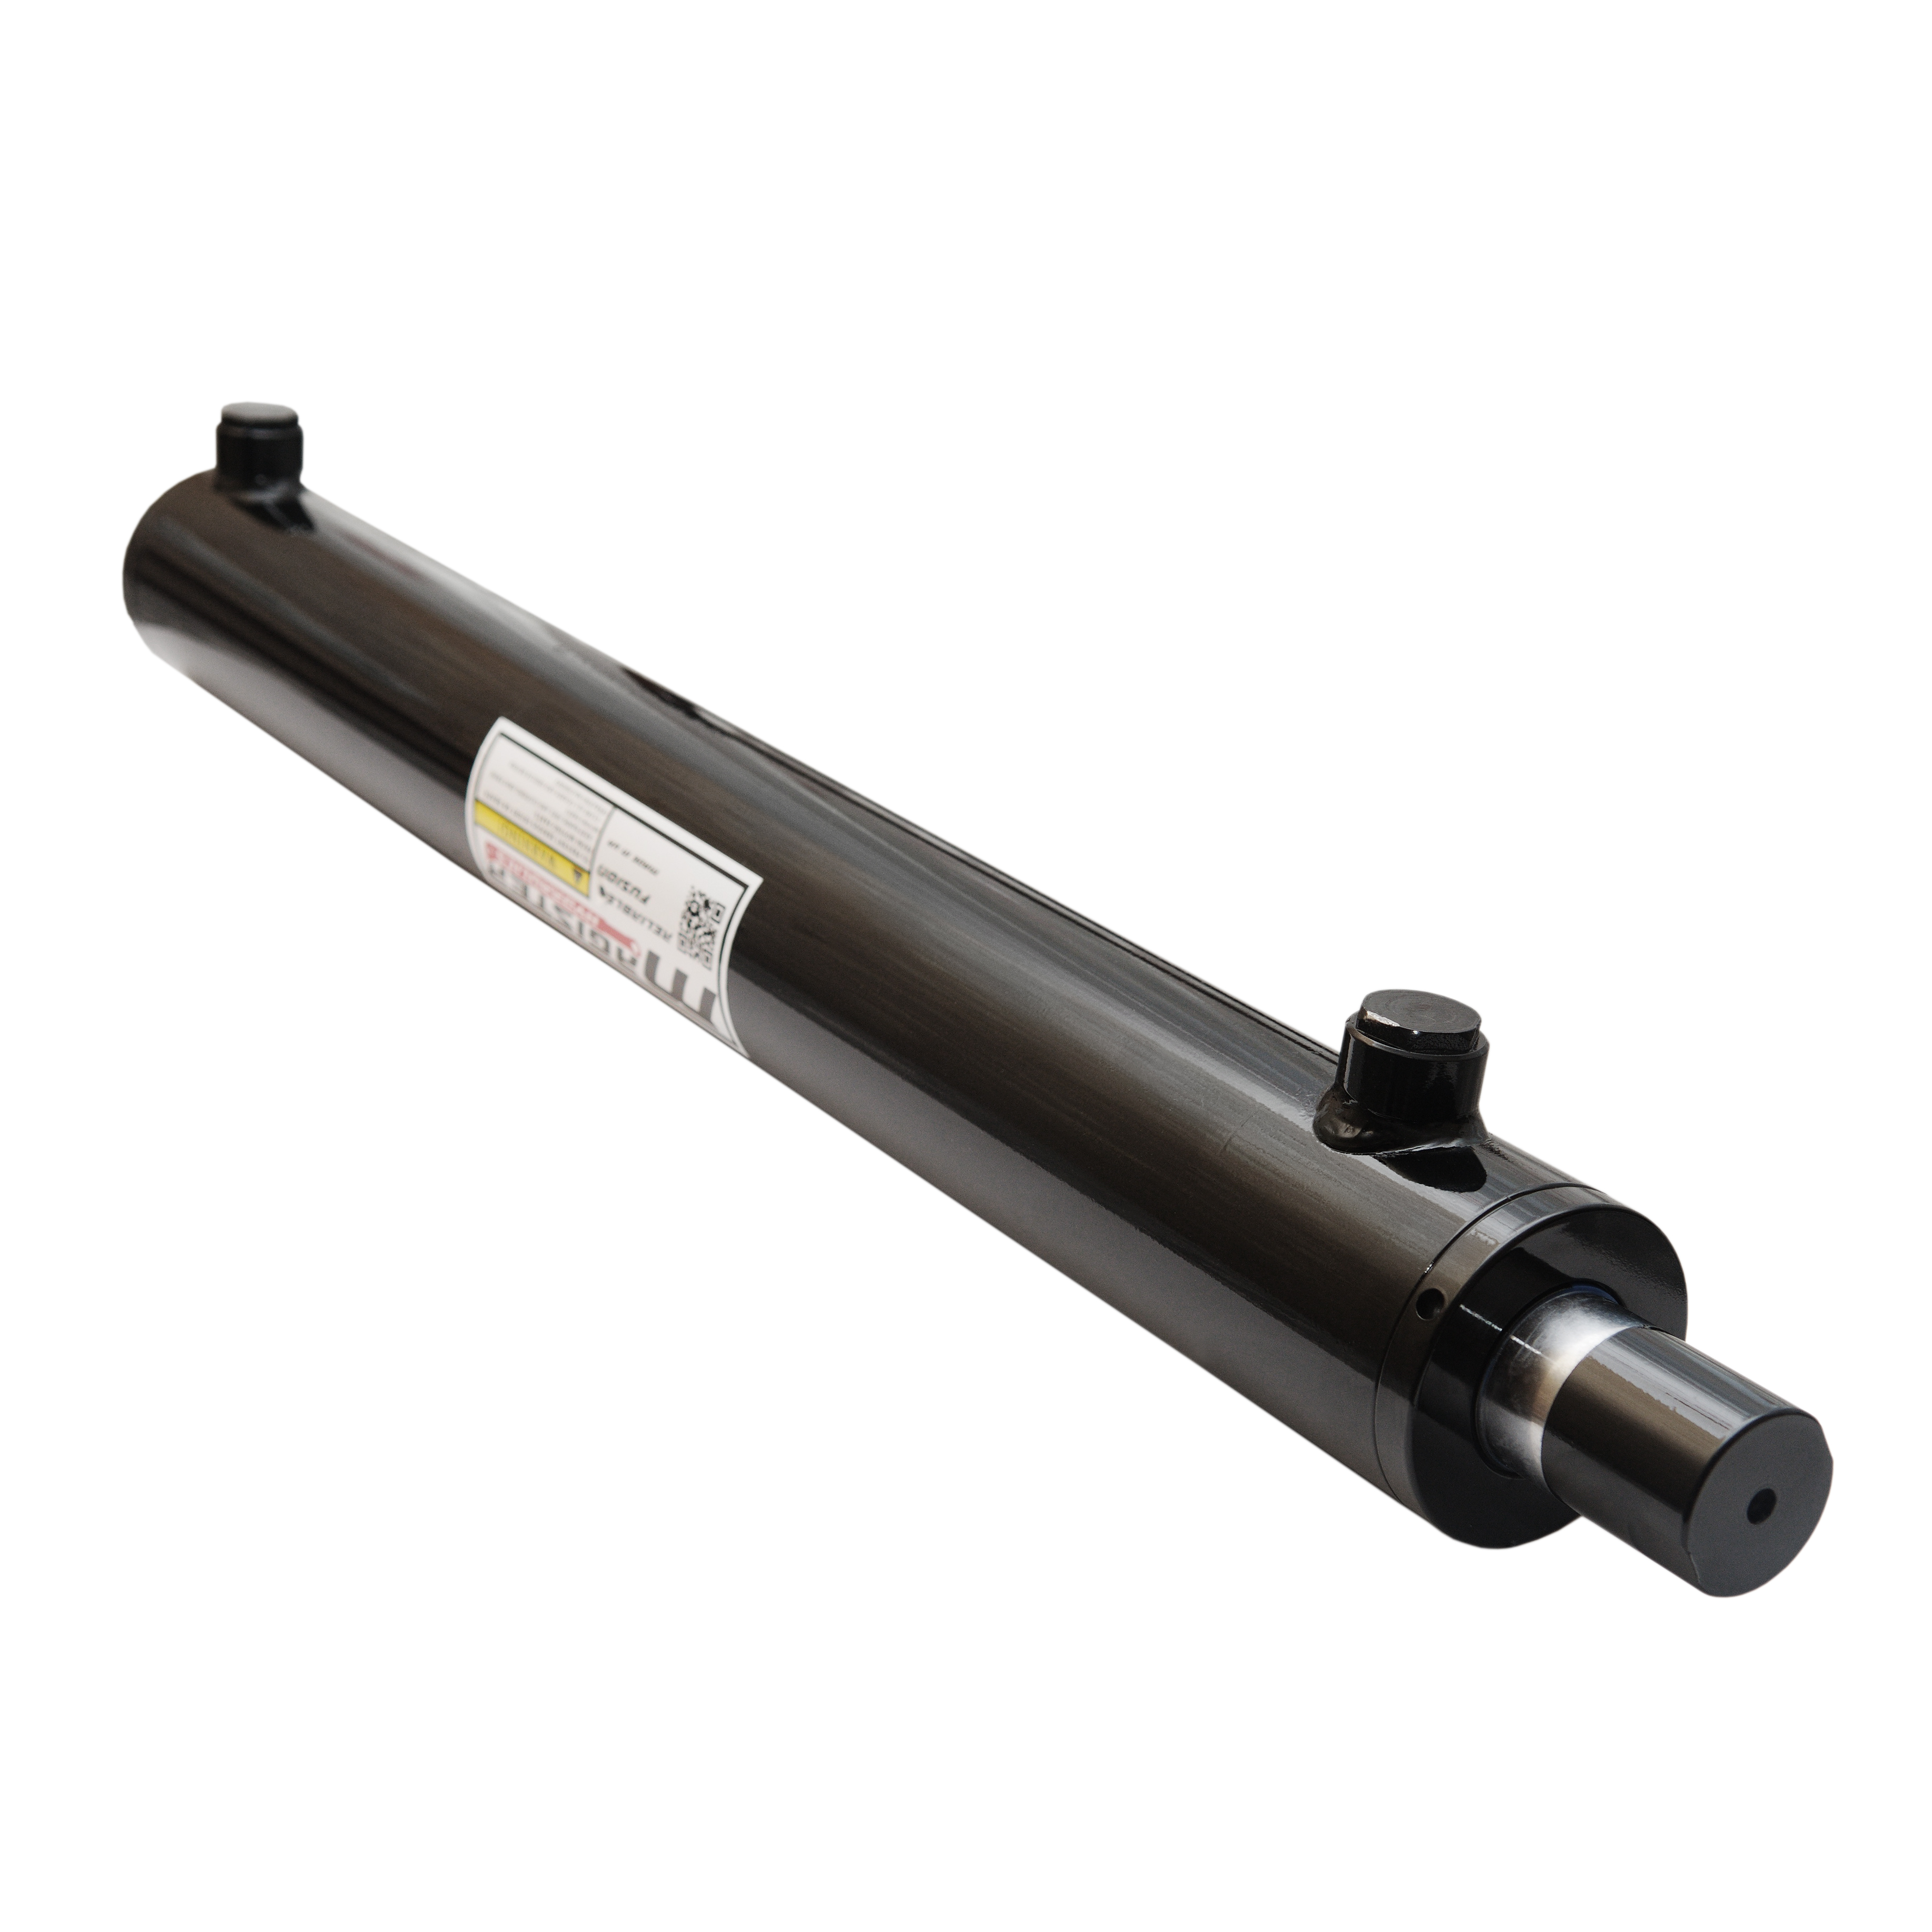 2.5 bore x 14 stroke hydraulic cylinder, welded universal double acting cylinder | Magister Hydraulics